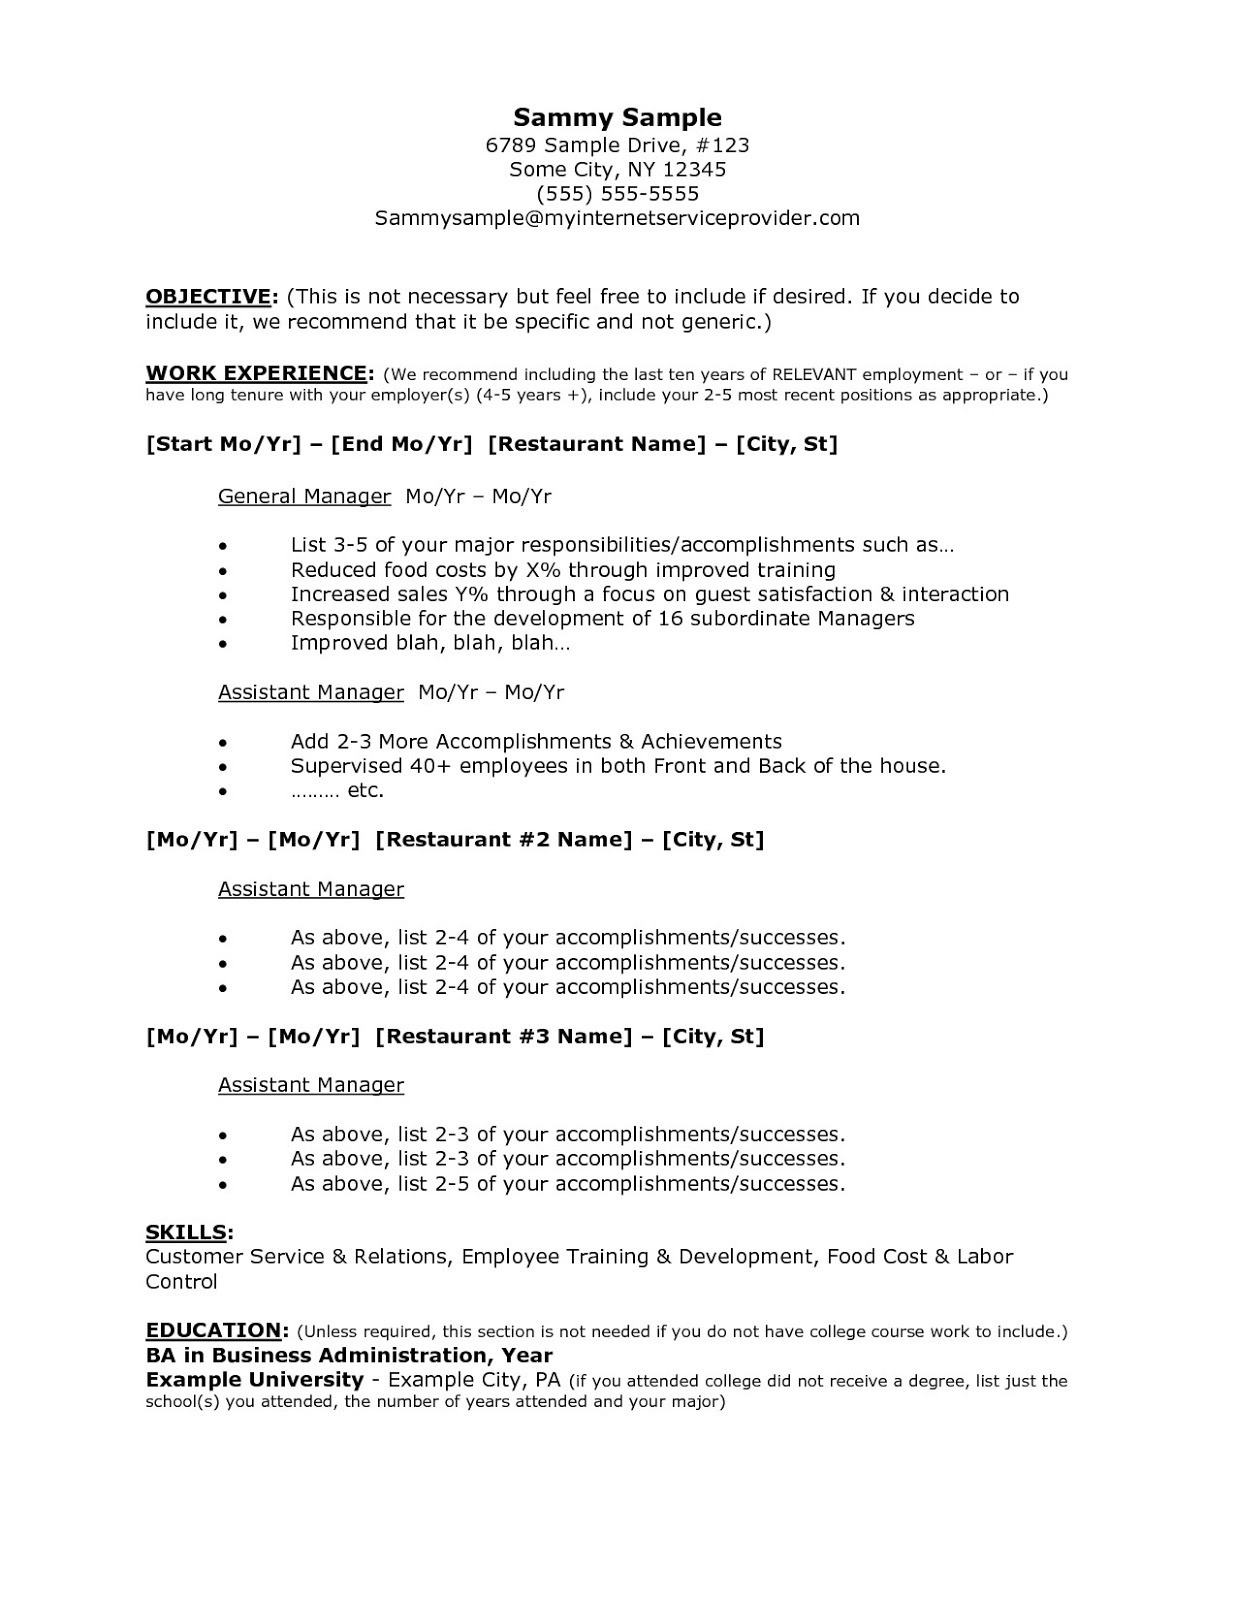 Objective in resume for universities